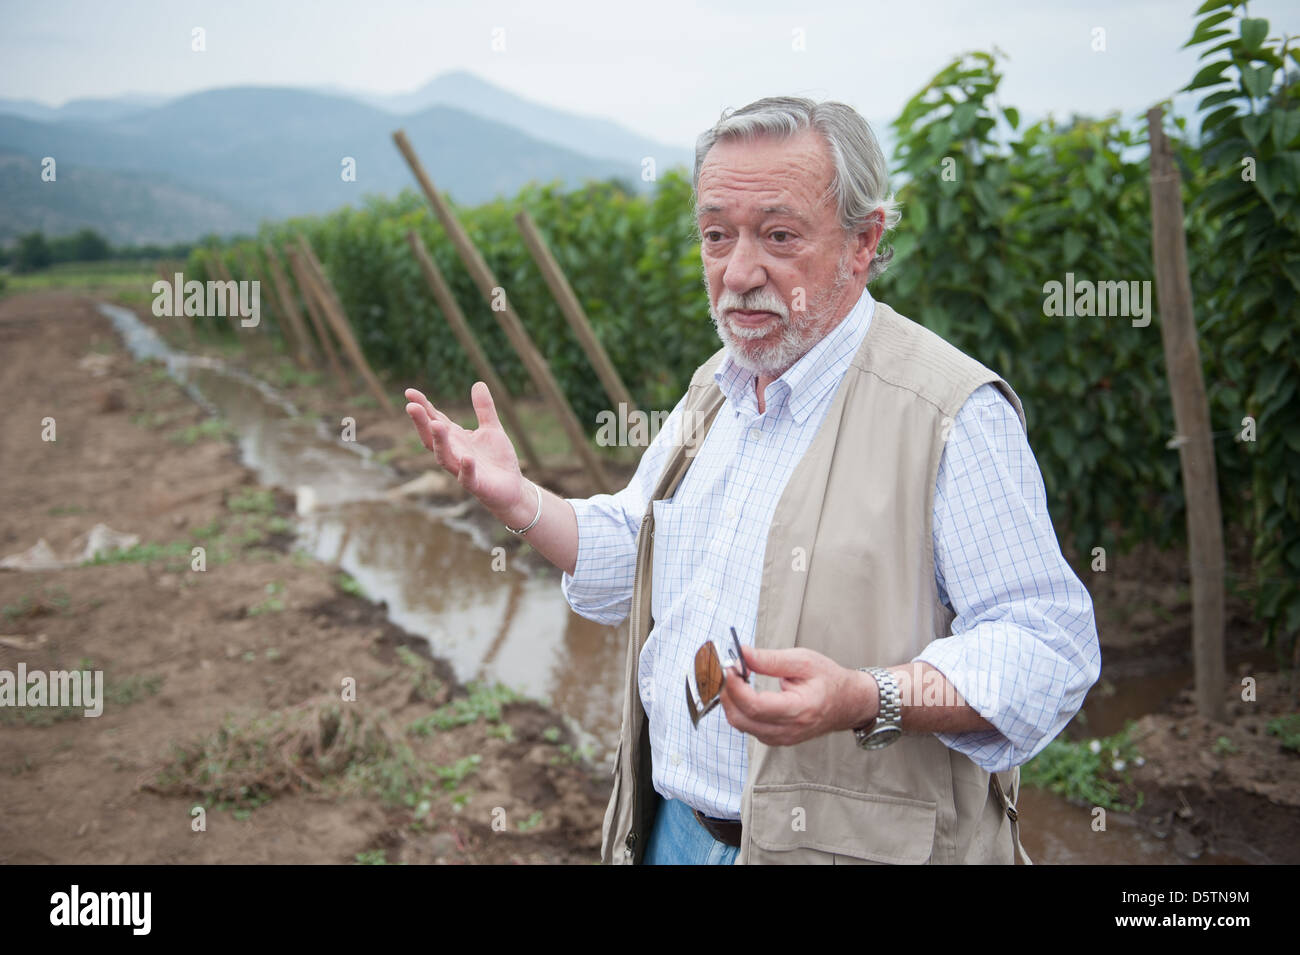 Businessman providing tour on a fruit farm in Chile, South America Stock Photo